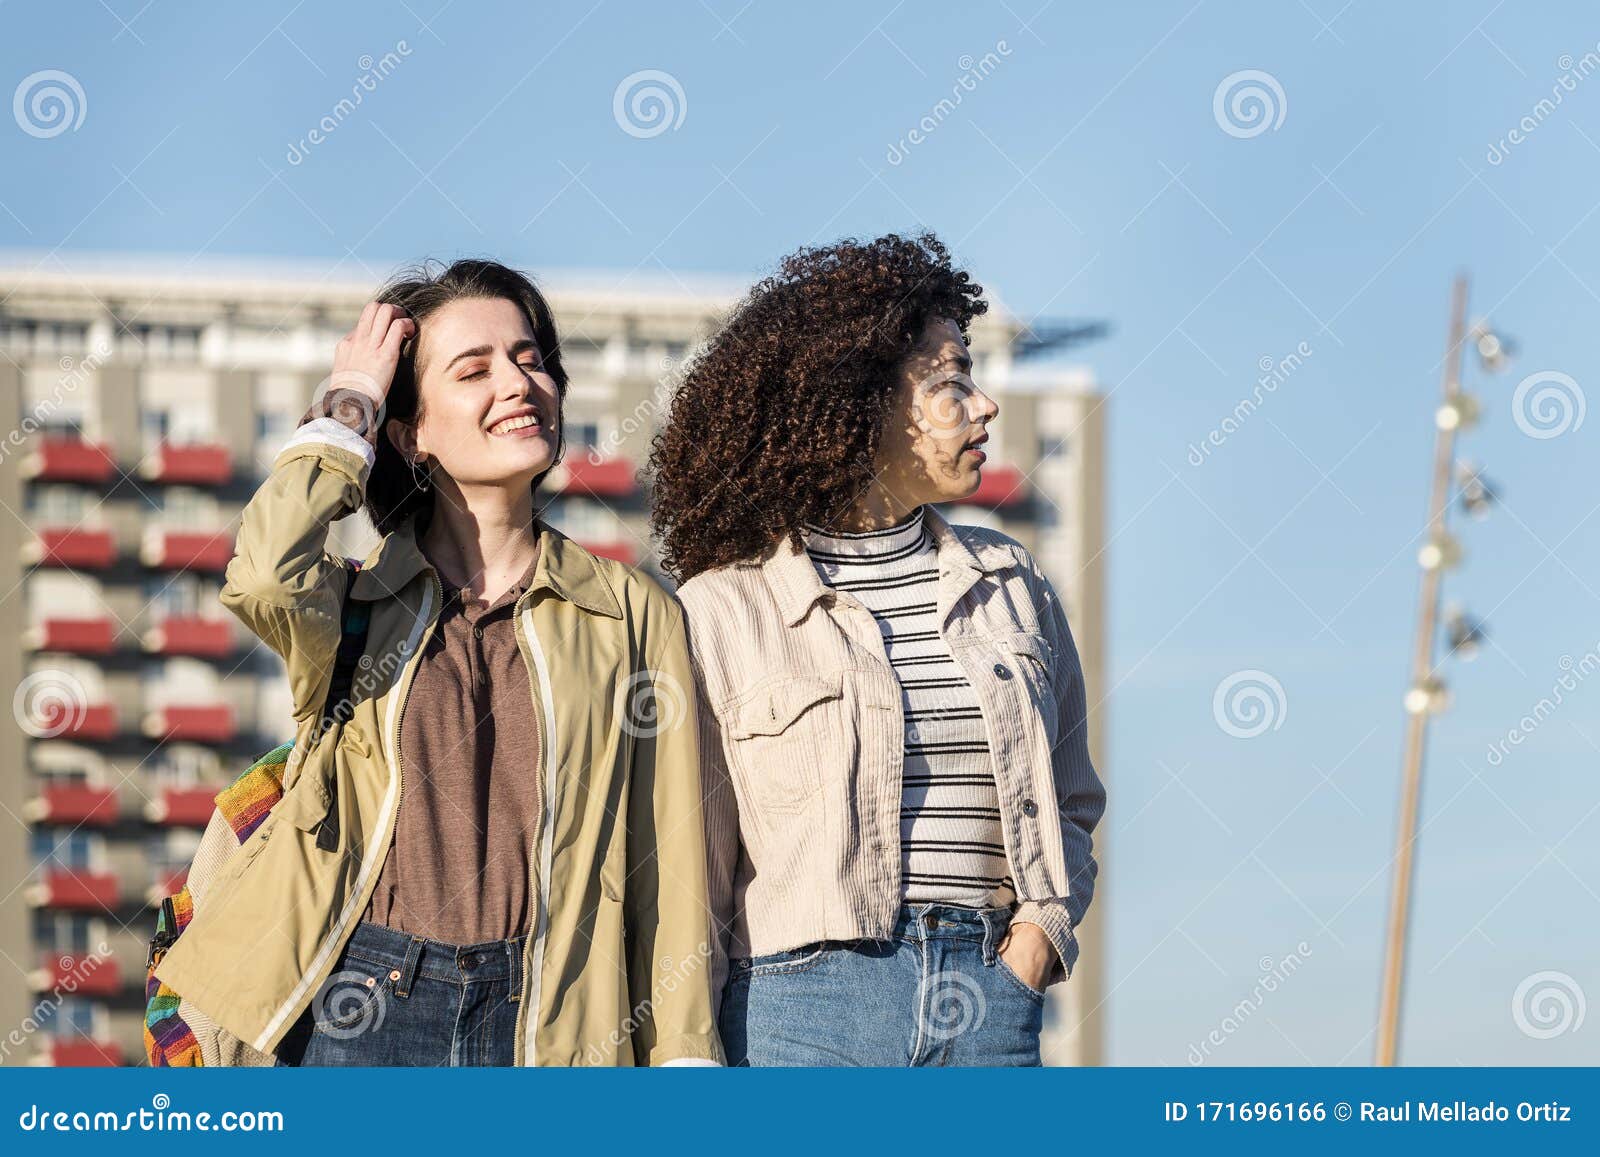 Two Young Girls Walking in the City Holding Hands Stock Photo